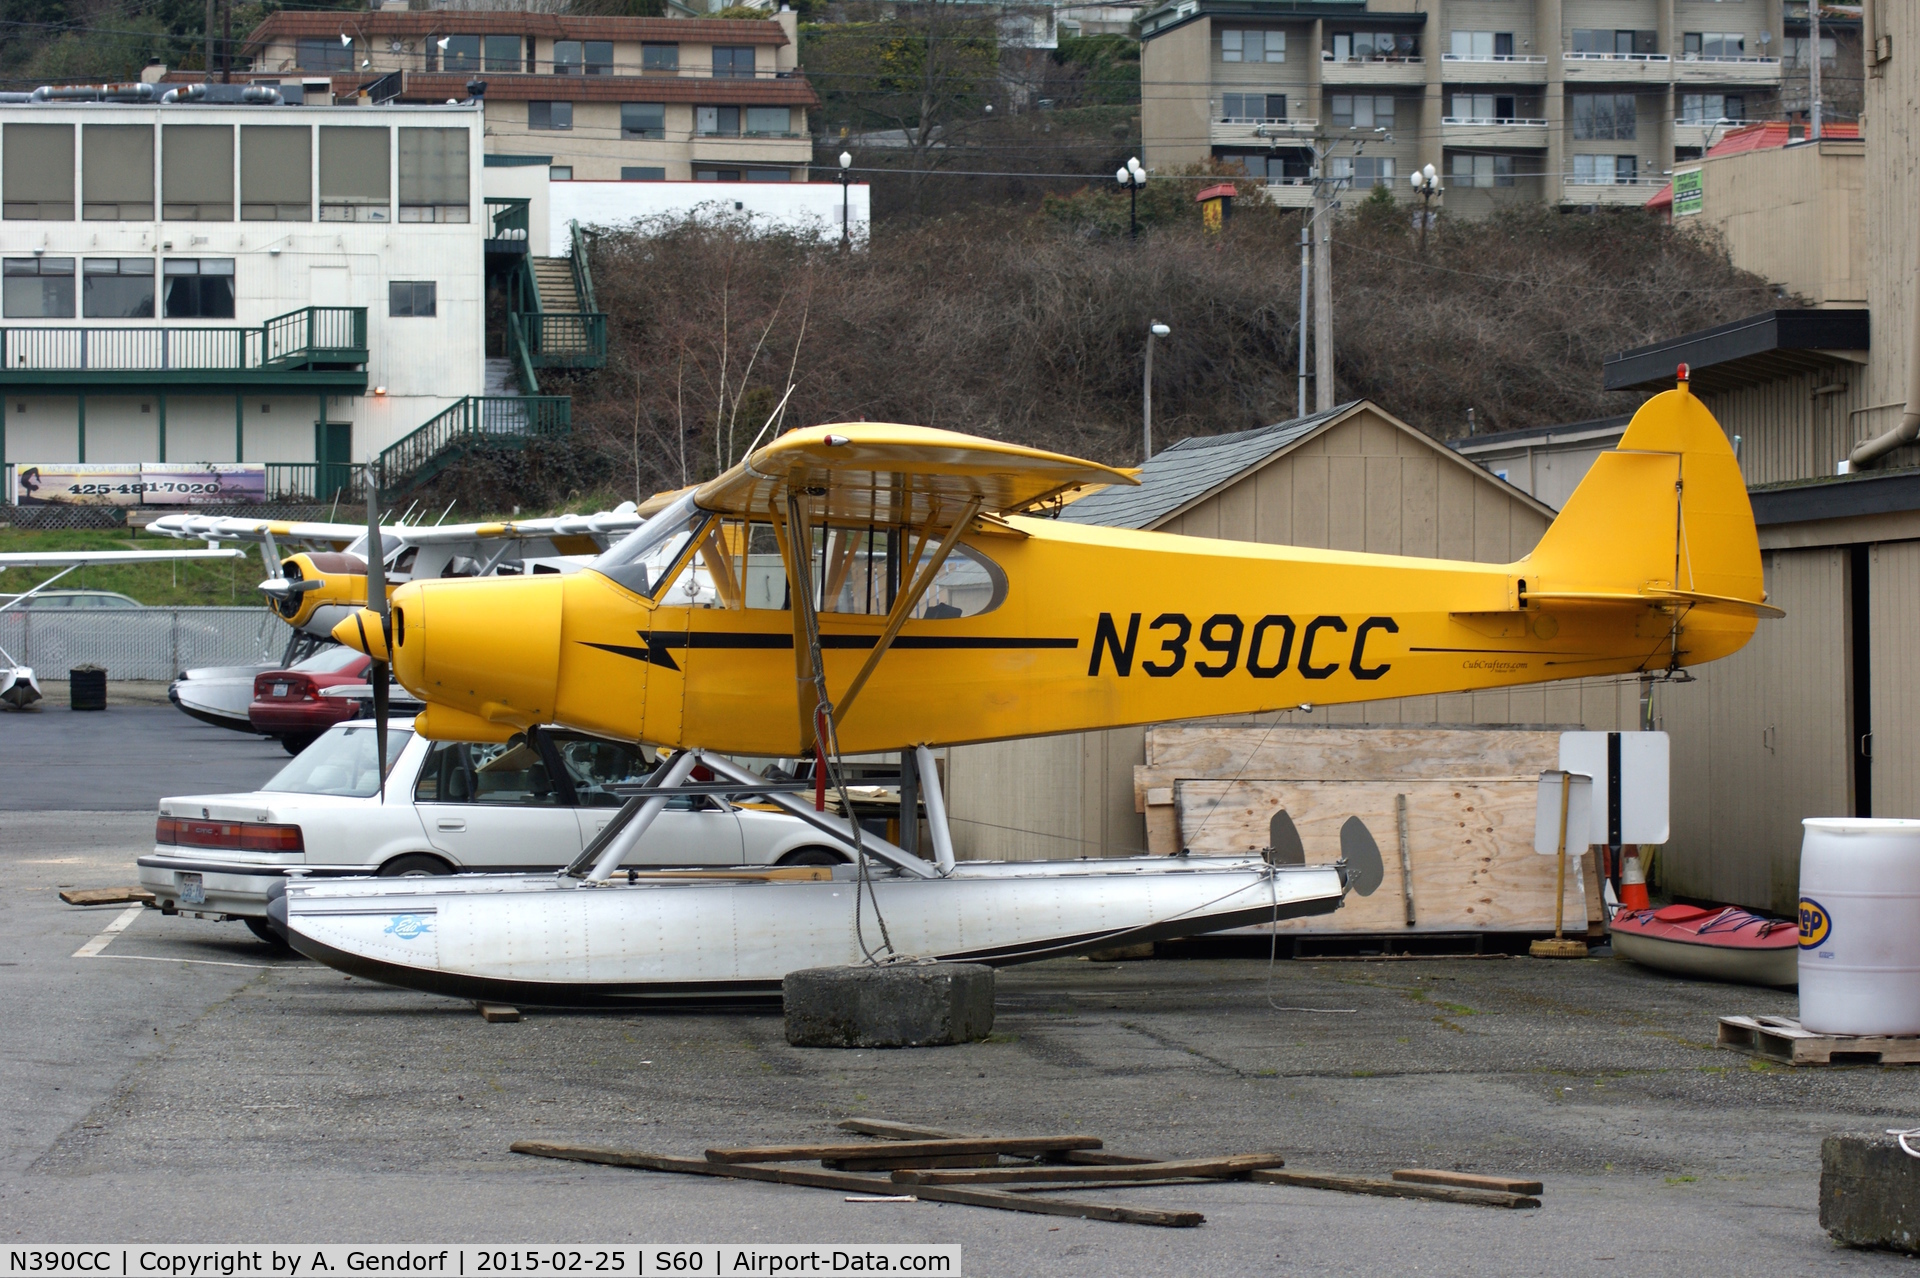 N390CC, 2002 Piper/cub Crafters PA-18-150 C/N 9944CC, Kenmore Air (untitled), is here on the maintenence apron at the Kenmore Air Seaplane Base(S60)